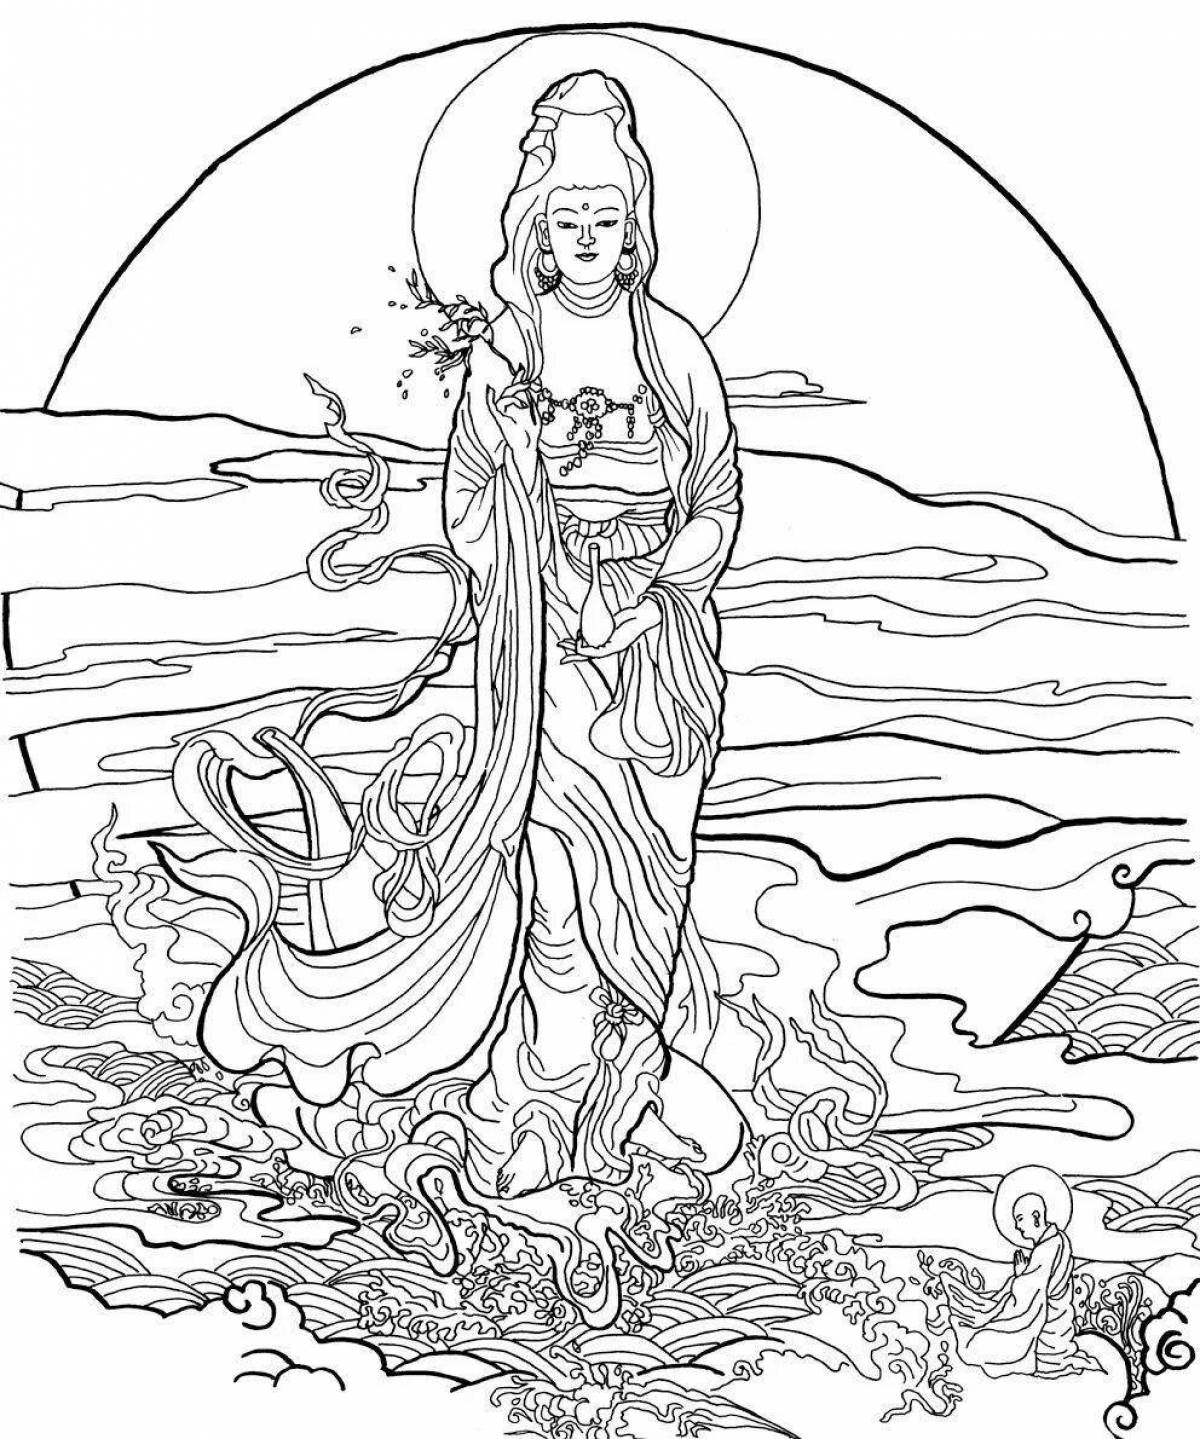 Coloring book peaceful buddhism